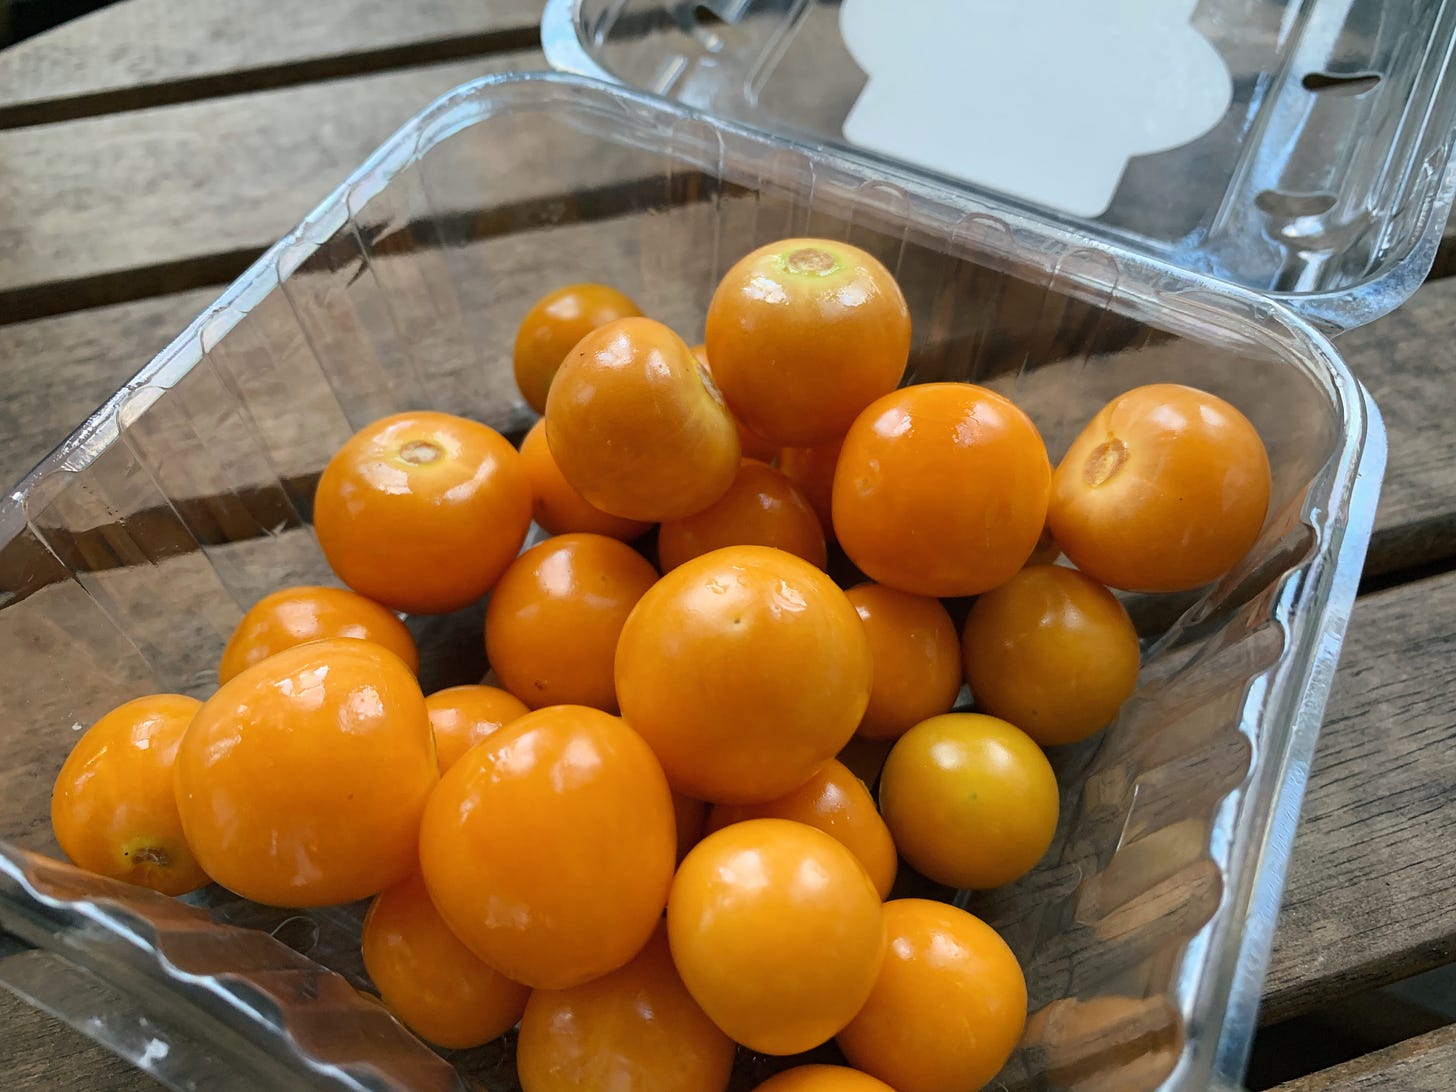 An opened plastic box full of bright gooseberries (also known as golden berries).